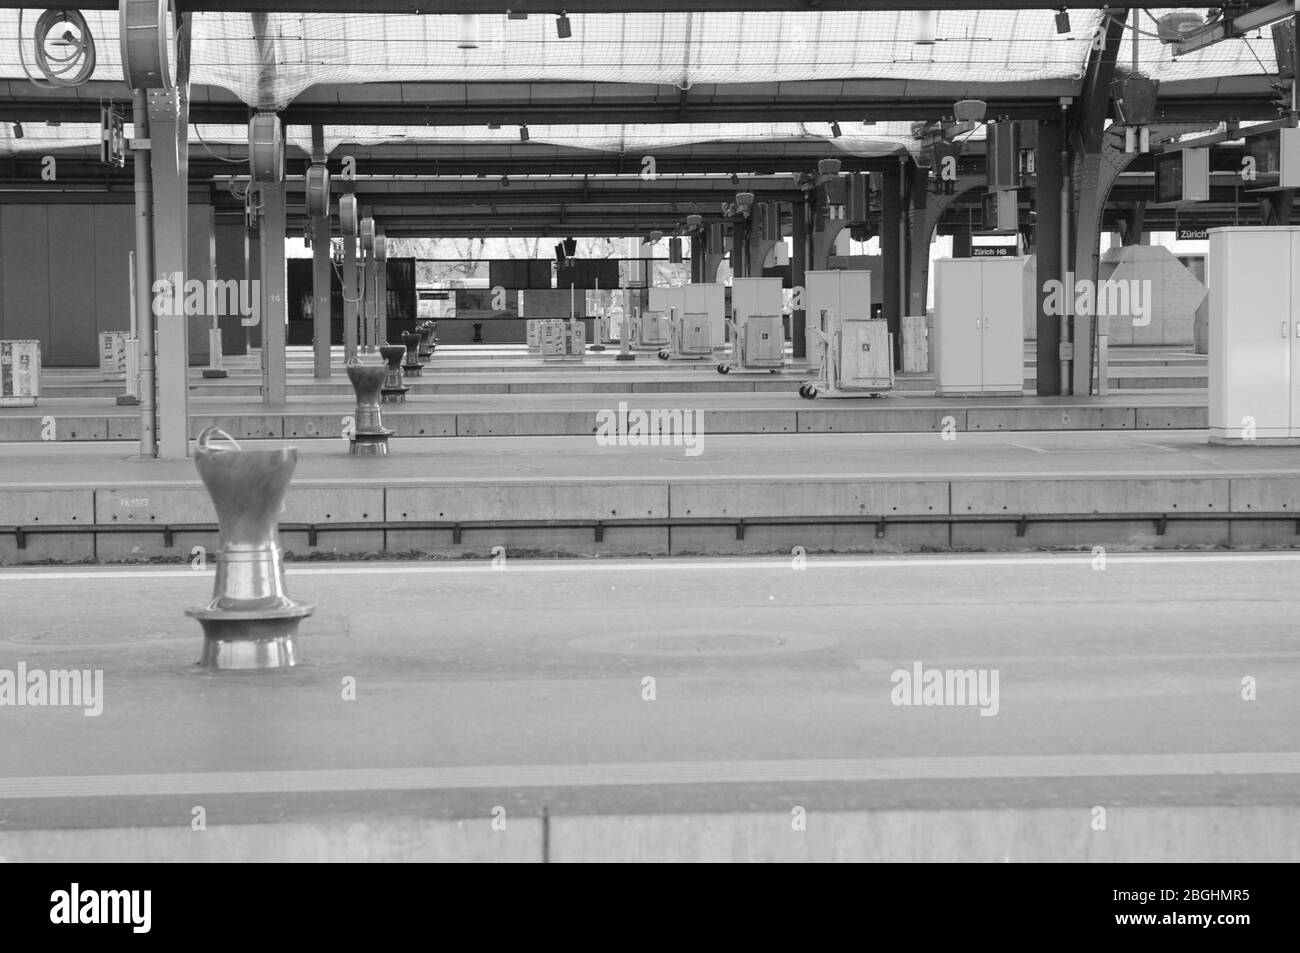 Zürich/Switzerland: No trains and empty tracks at the central station due to CoVid19 Virus Lockdown. The Stand still will last at least until 26th of Stock Photo